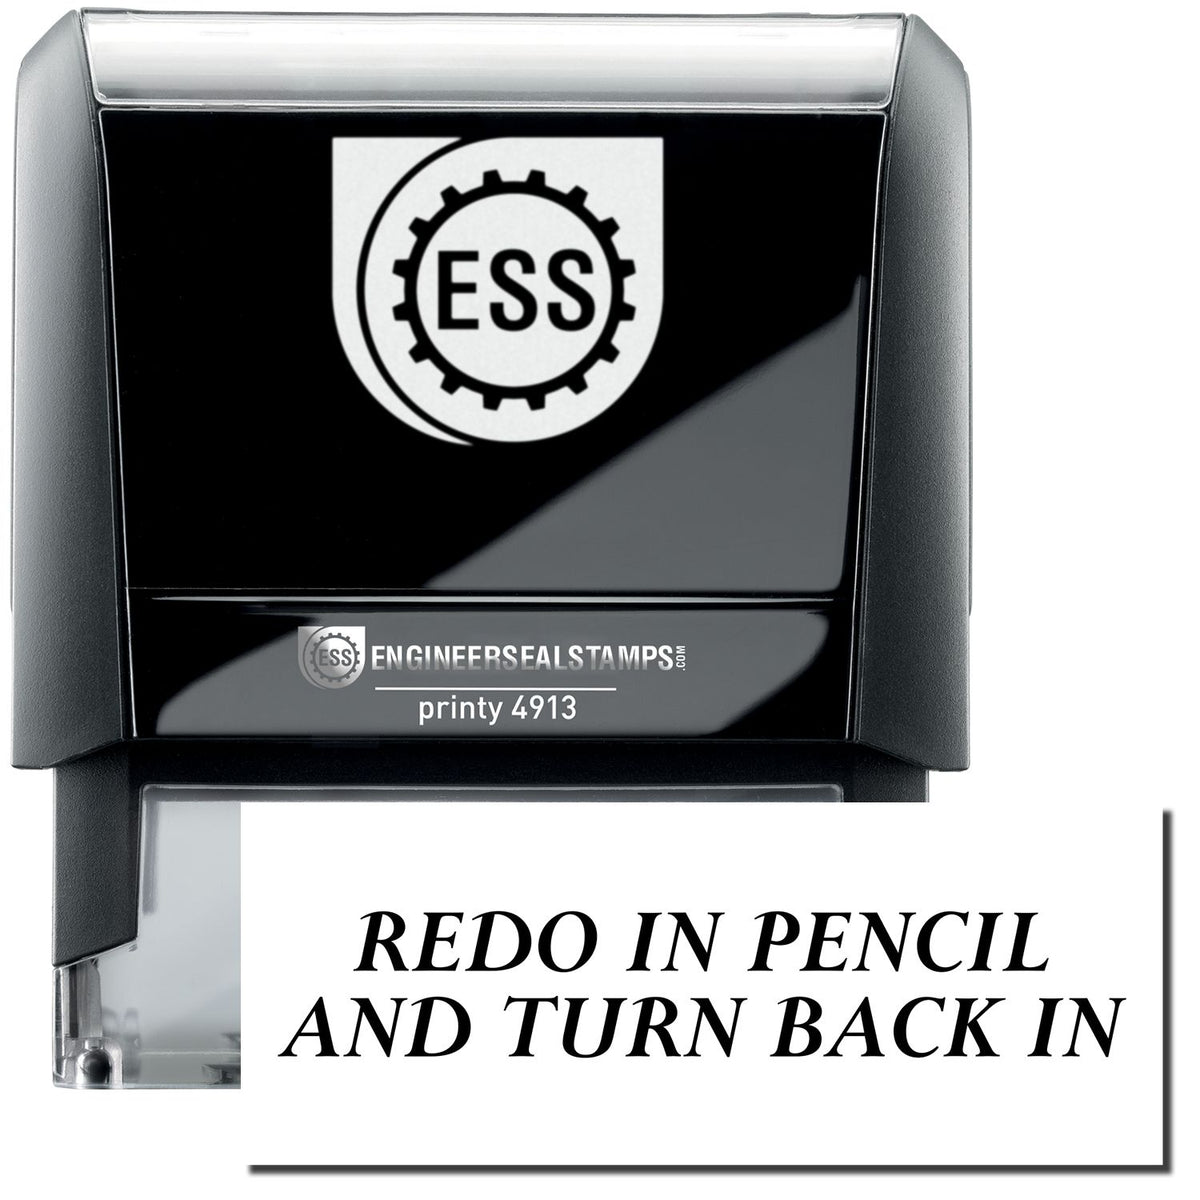 A self-inking stamp with a stamped image showing how the text &quot;REDO IN PENCIL AND TURN BACK IN&quot; in a large font is displayed by it after stamping.